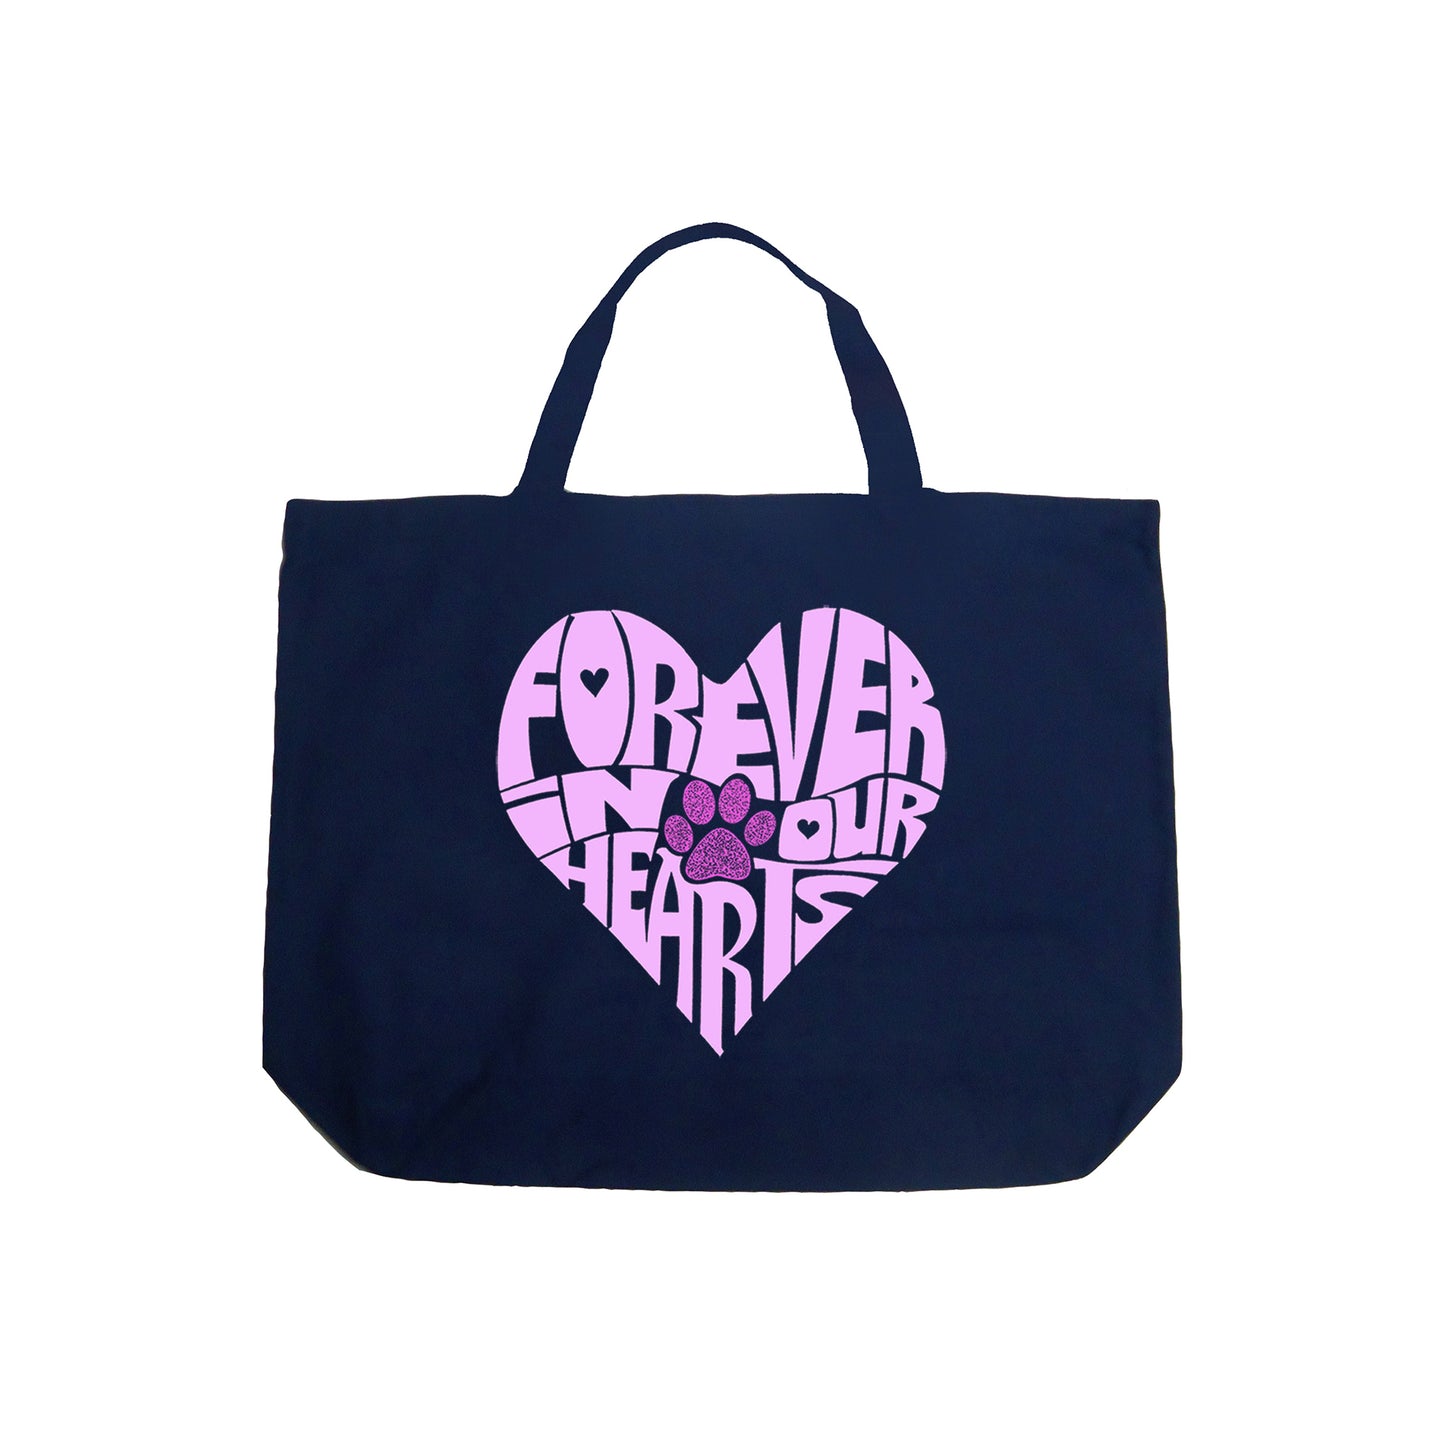 Forever In Our Hearts - Large Word Art Tote Bag